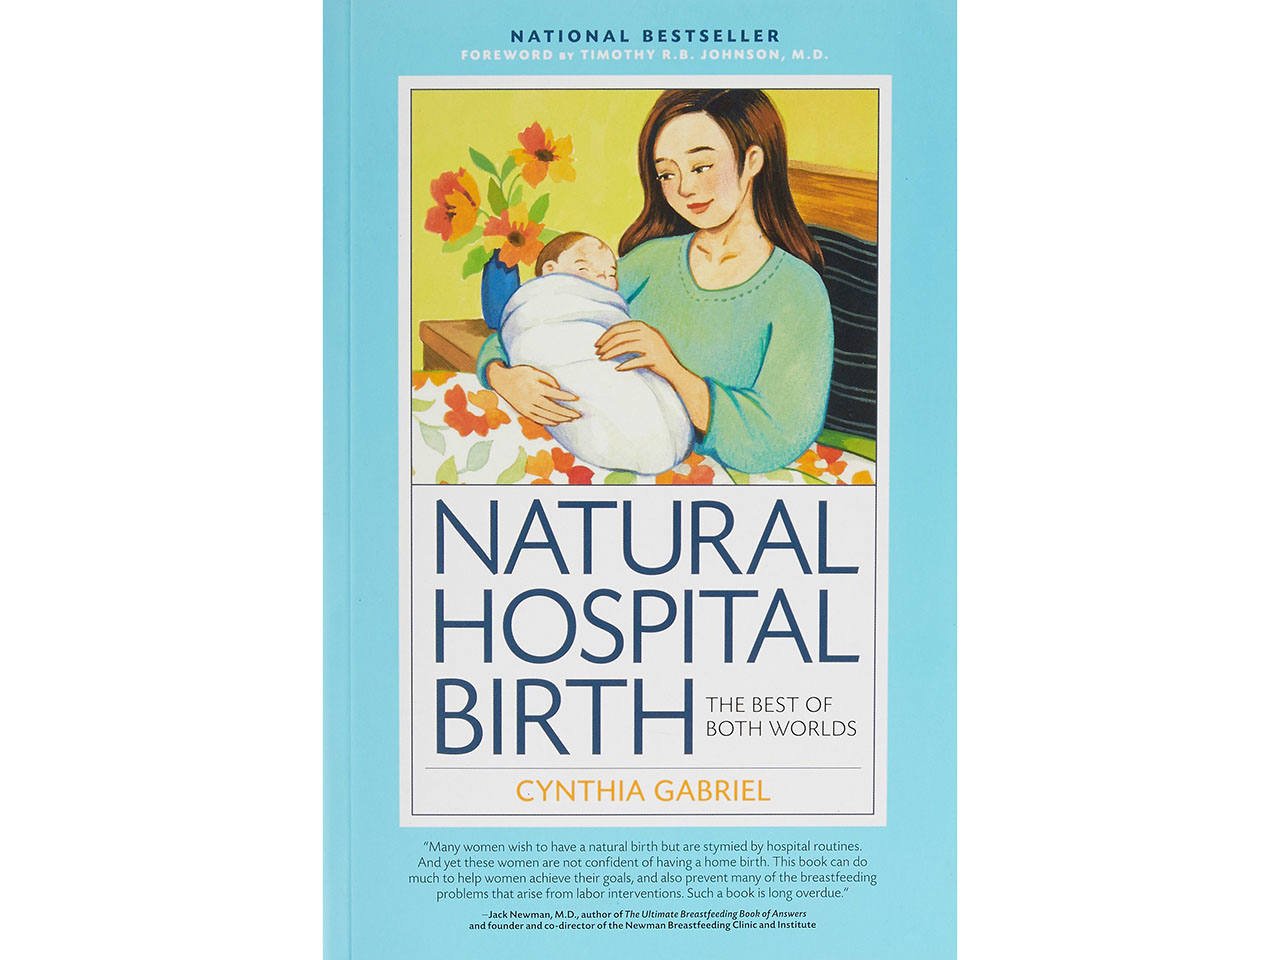 The cover of the pregnancy book a Natural Hospital Book